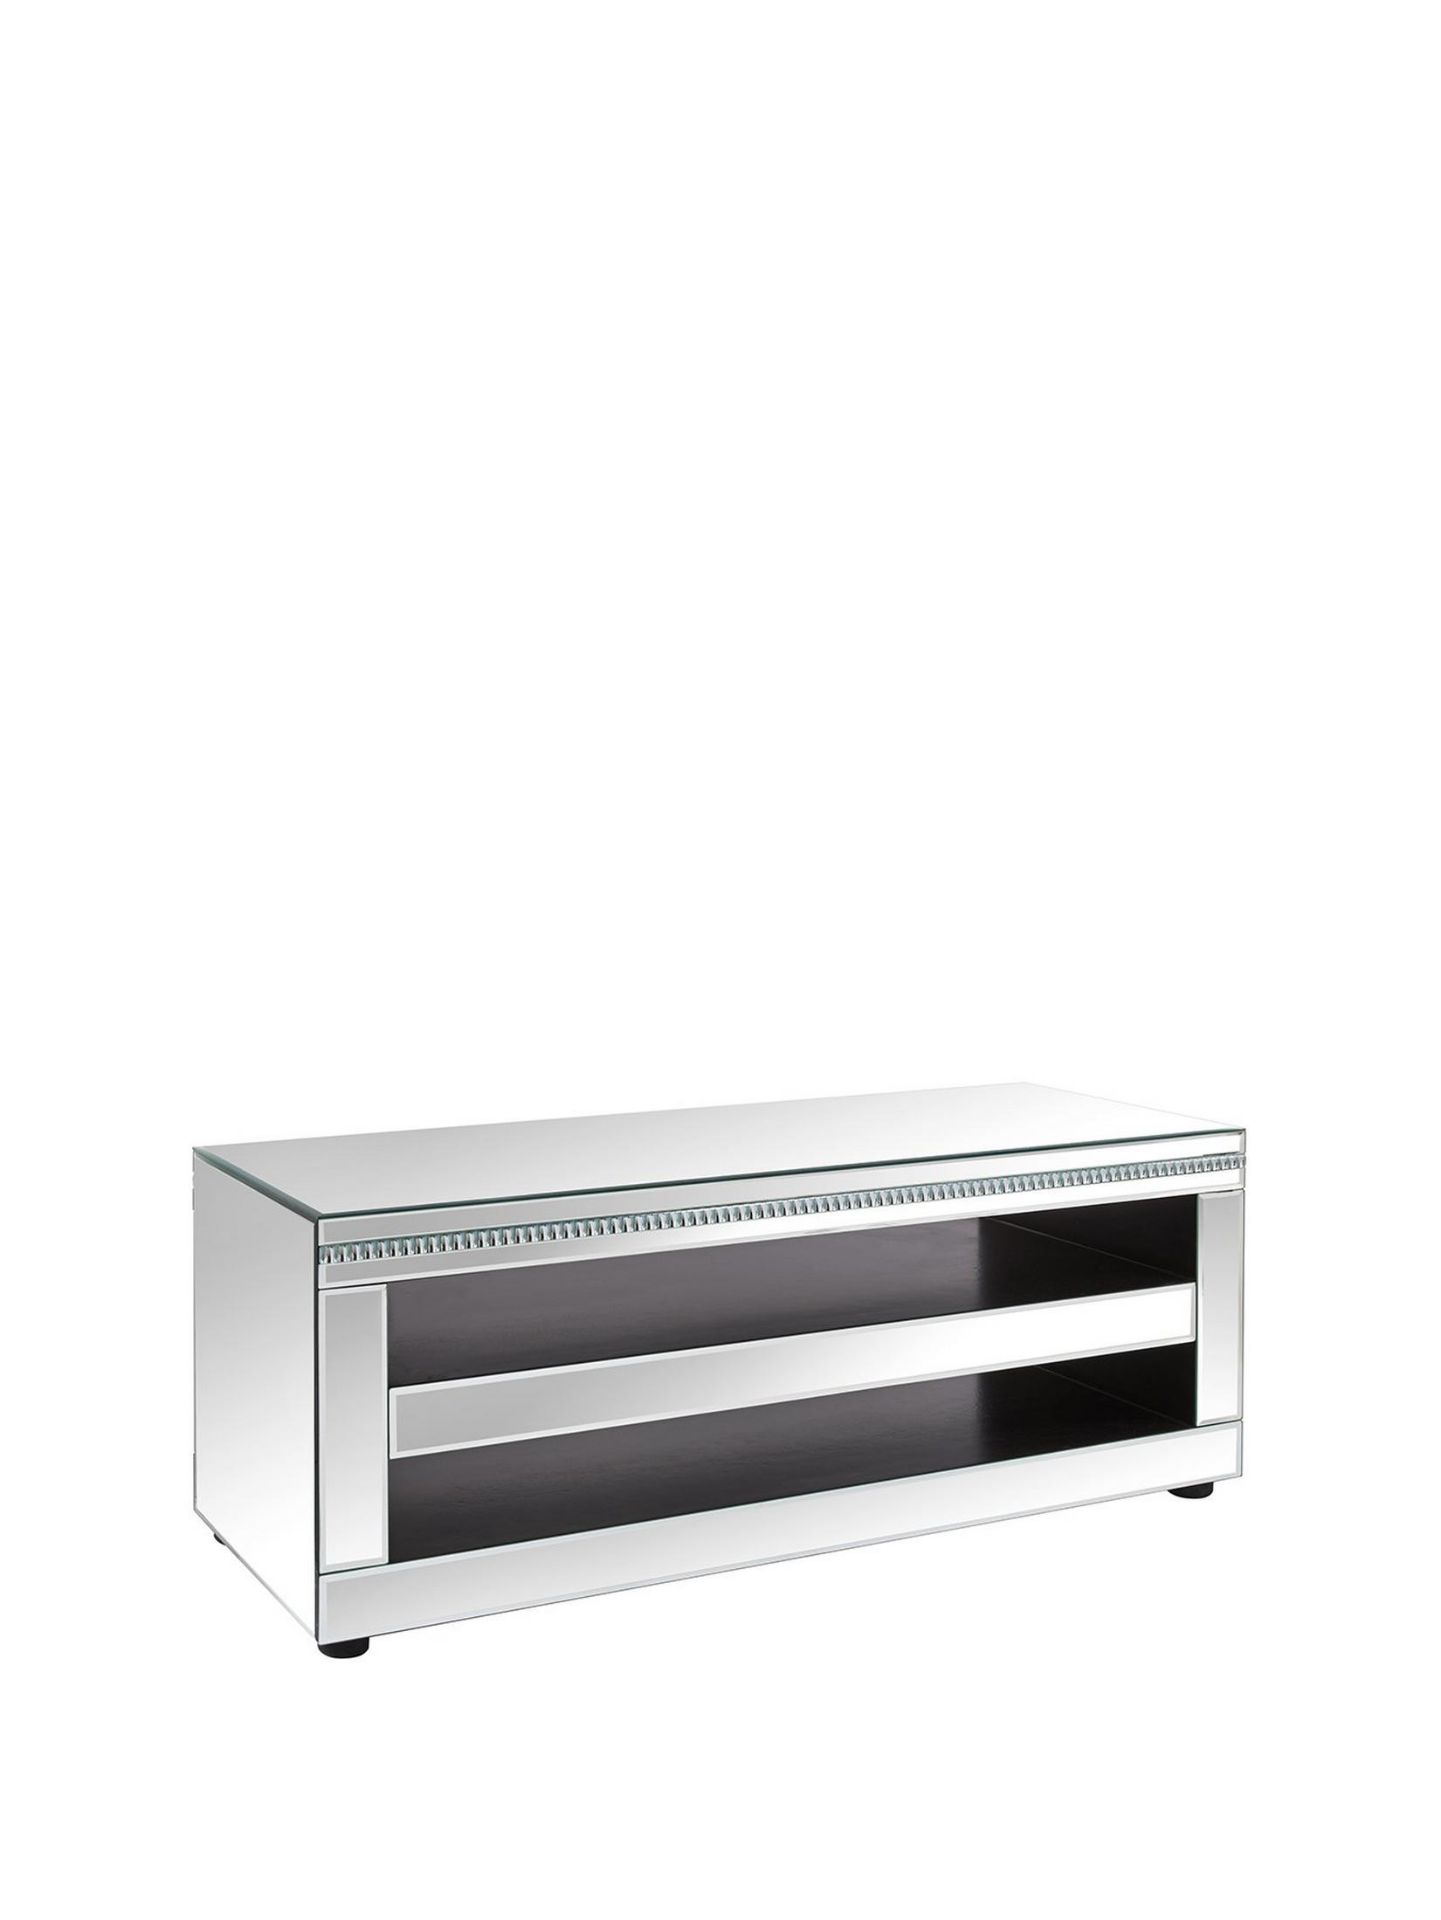 ORION MIRRORED TV / MEDIA UNIT - RRP £239 - Image 3 of 4